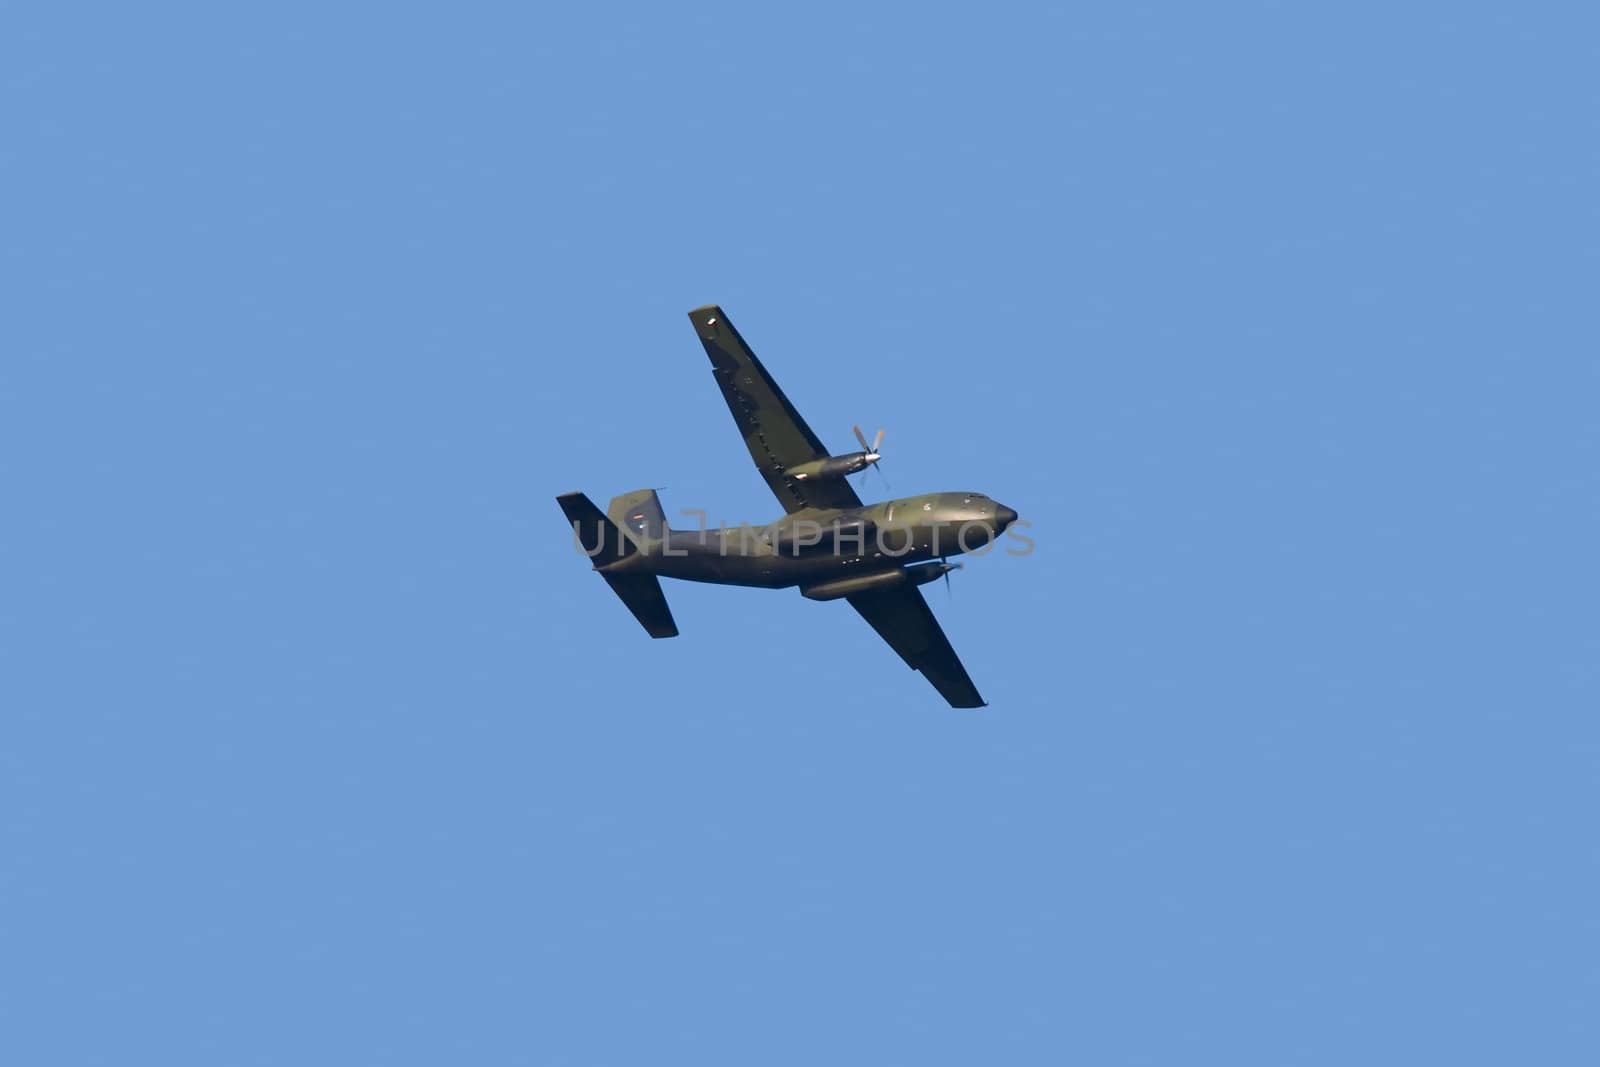 Military propeller aircraft flying in a clear skies